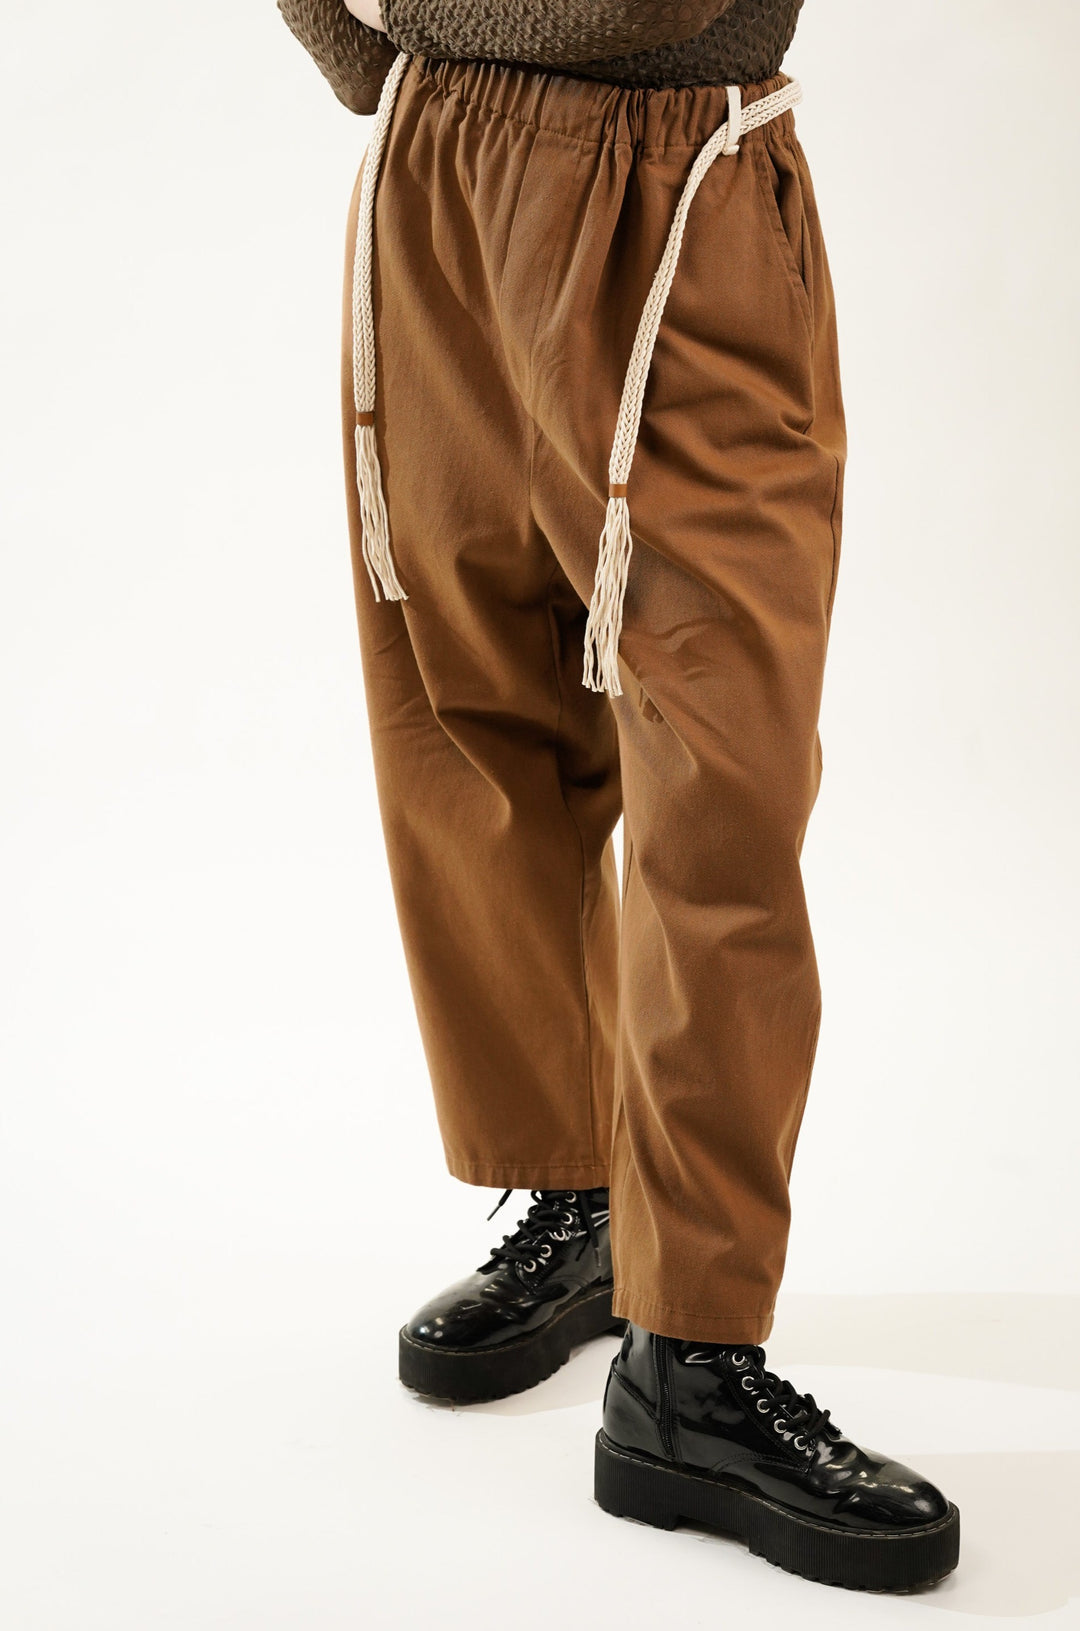 Relaxed fit brown pants with pockets